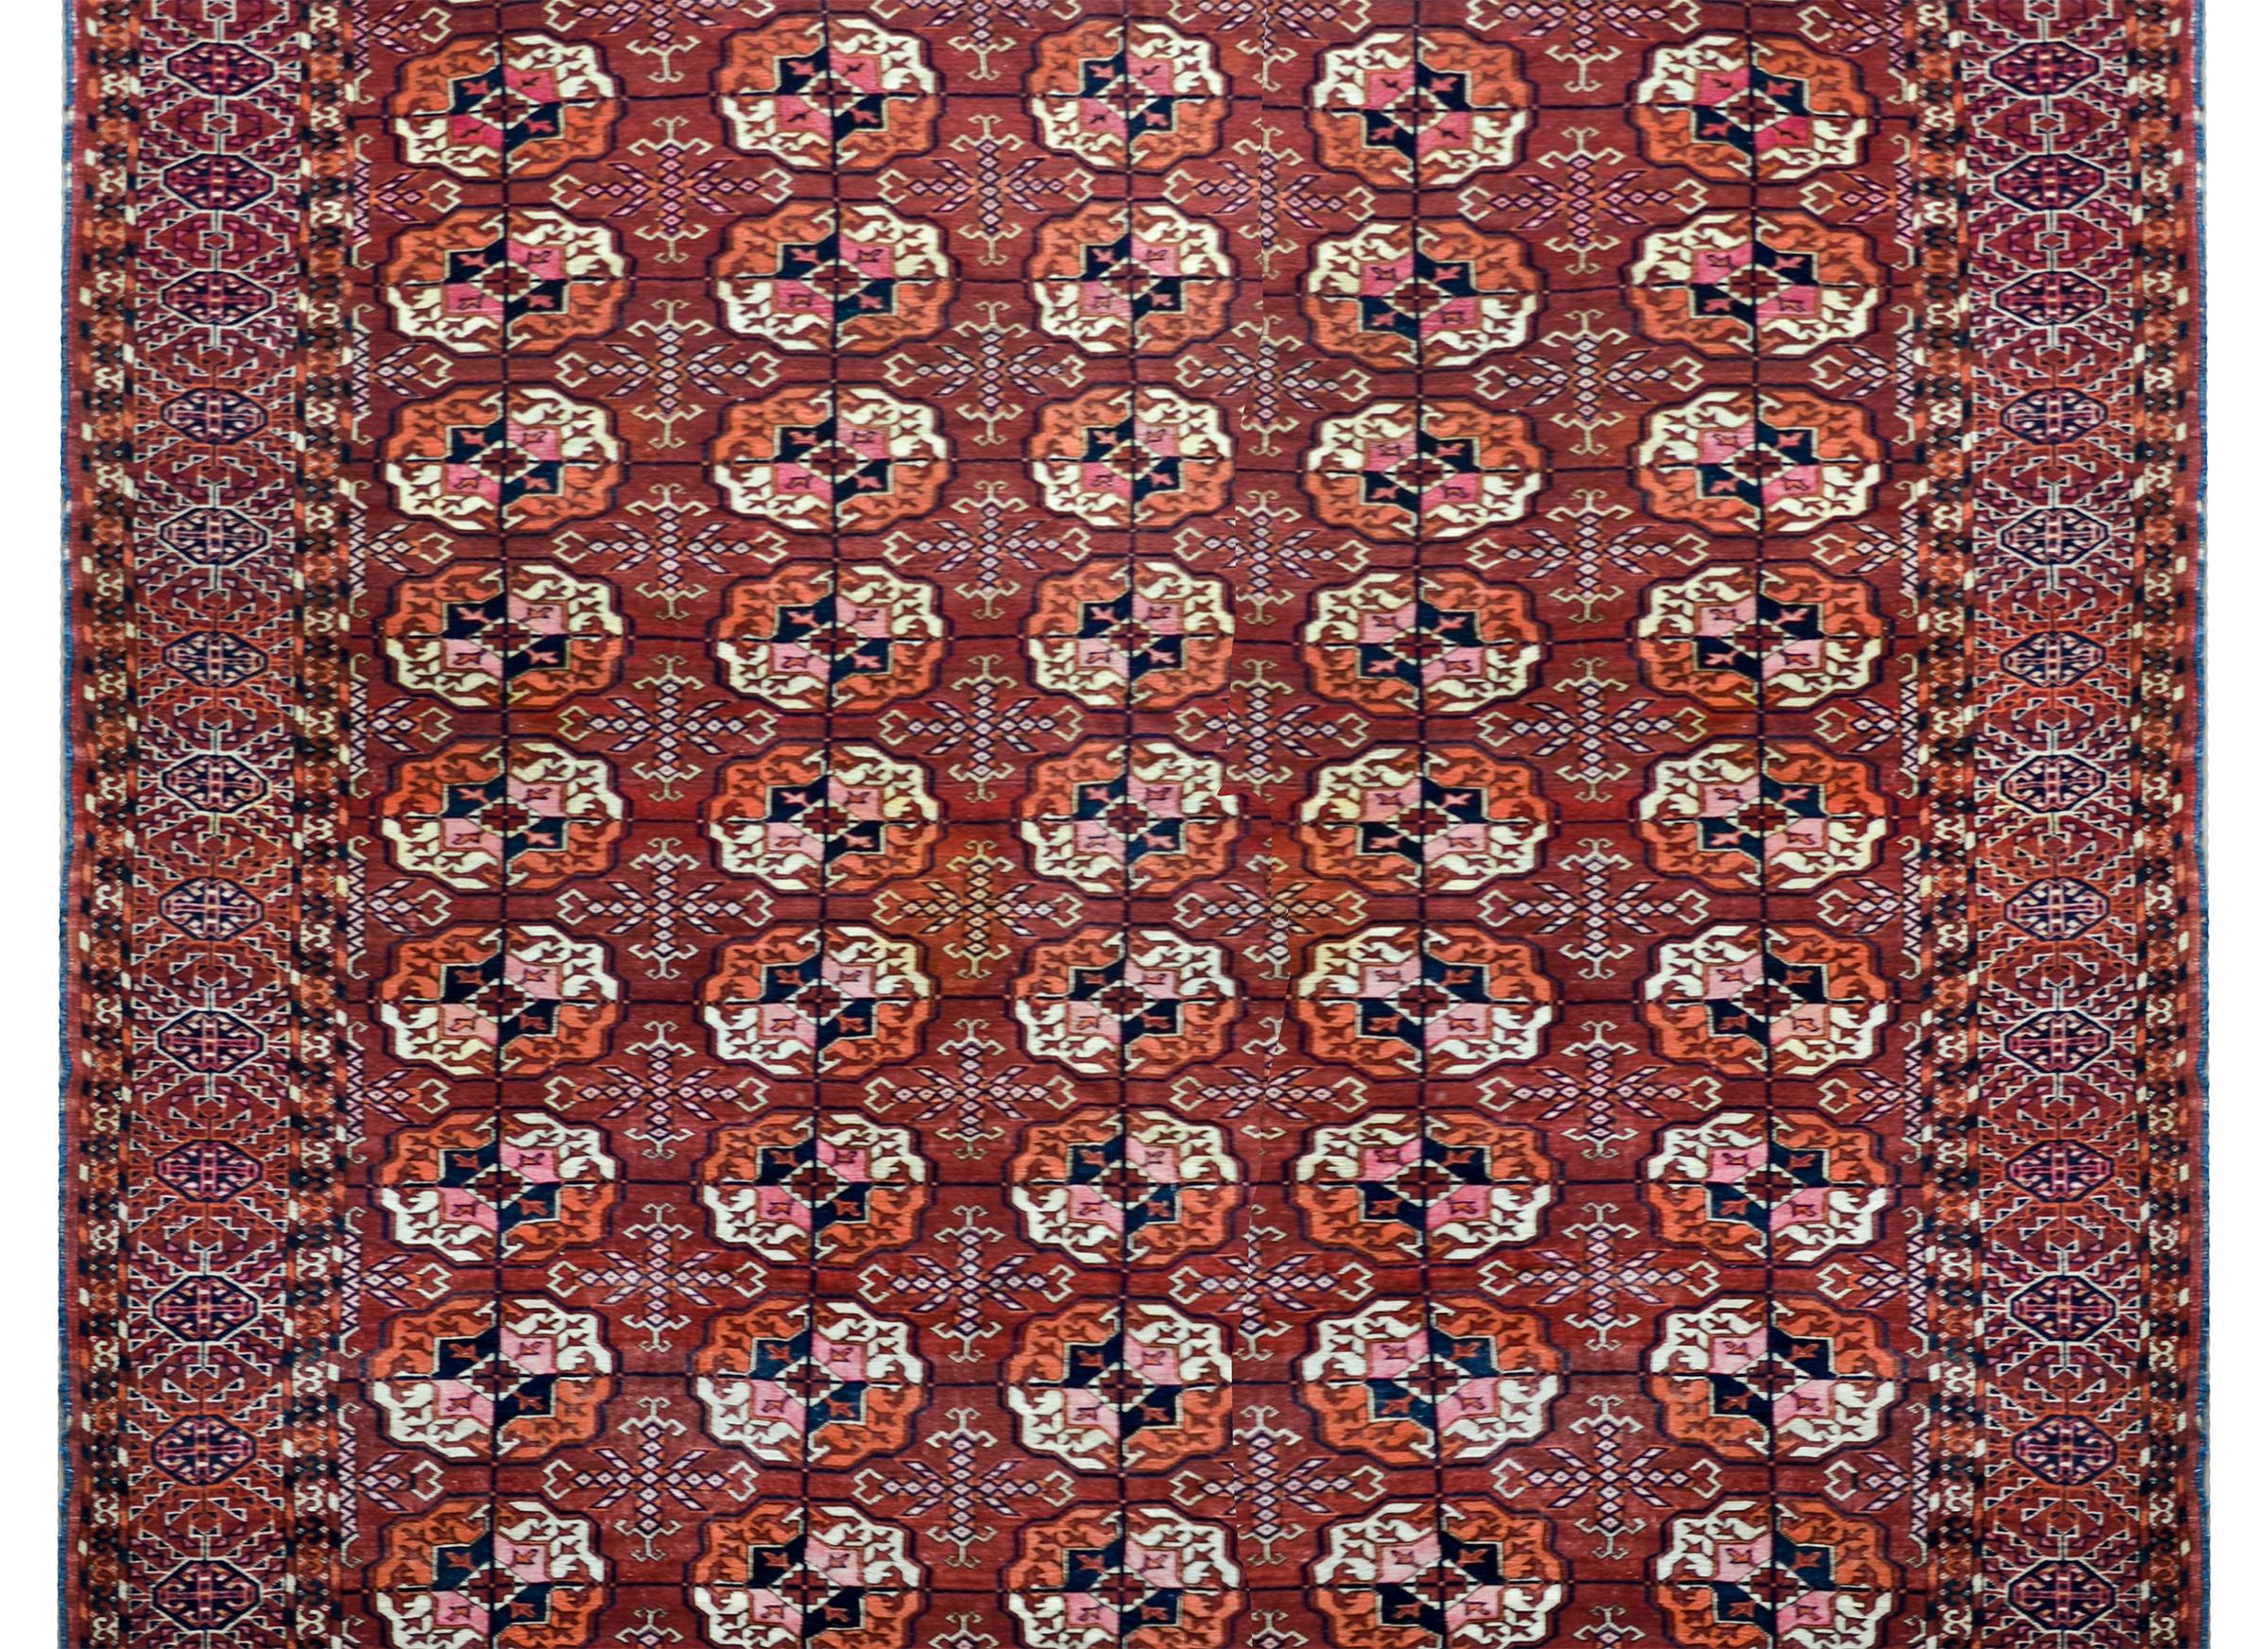 A striking early 20th century Persian Teke rug with an all-over pattern with myriad geometric medallions woven in crimson, orange, white, and dark indigo, and surrounded by a wide geometric patterned border woven in similar colors as the field.